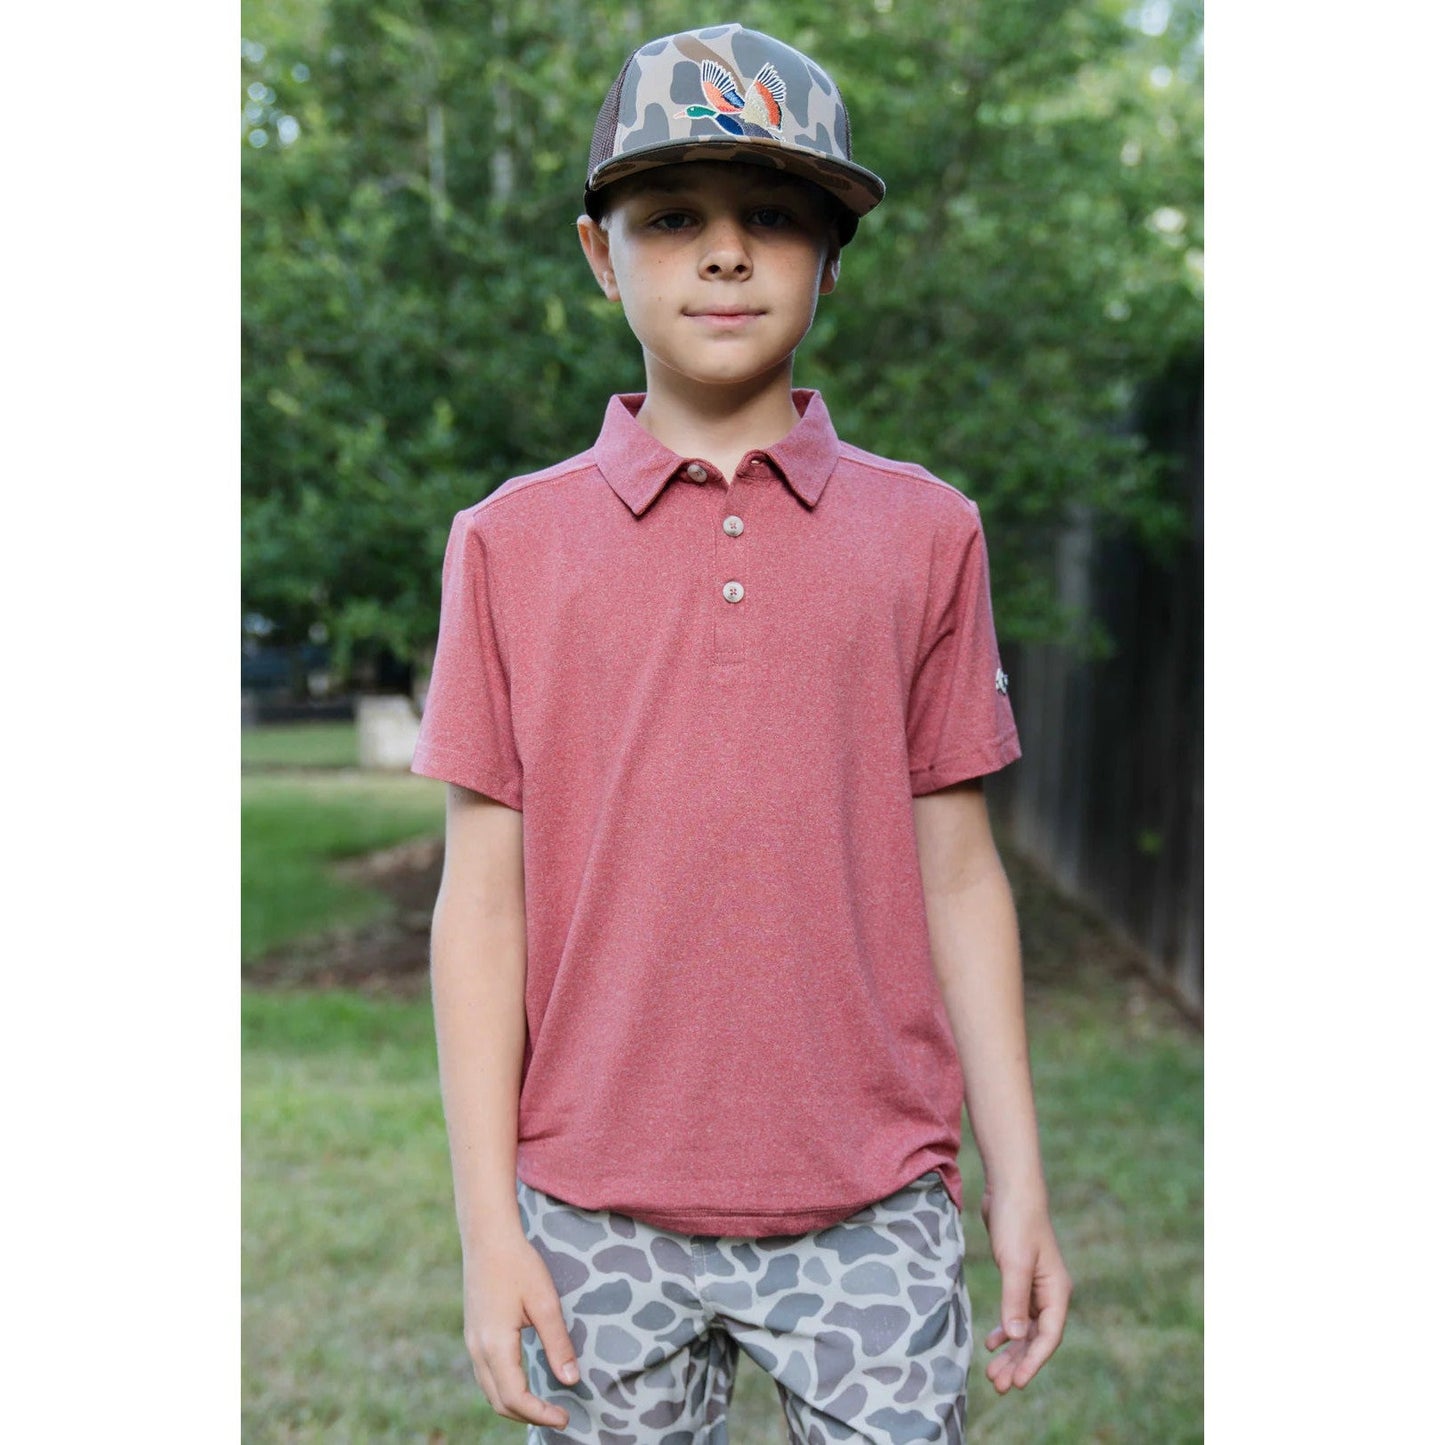 Burlebo Youth Performance Polo in Heather Brick